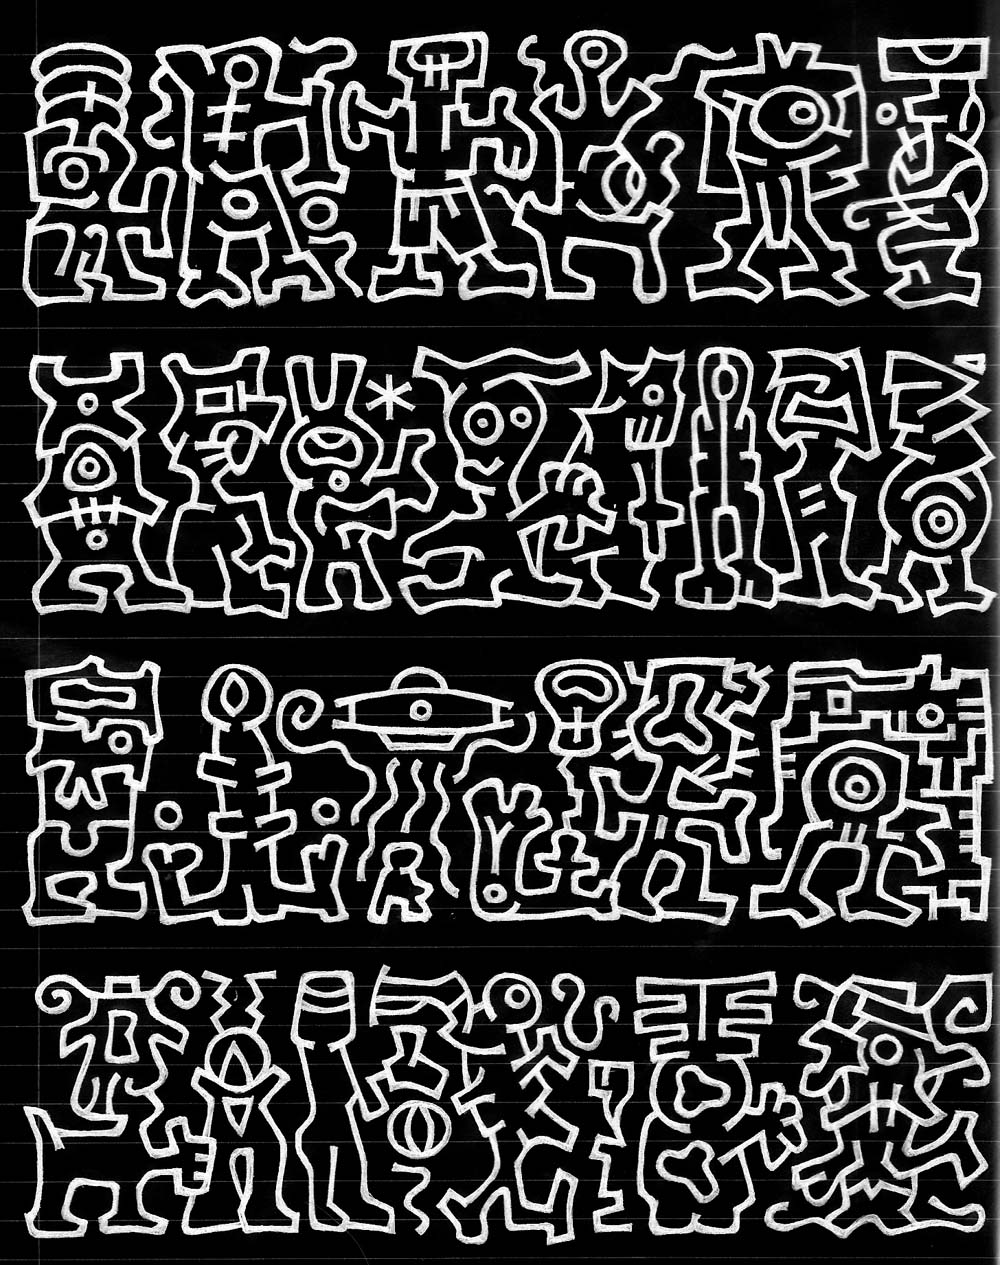 asemic writing - sequence of glyphs, like more complex versions of rongorongo